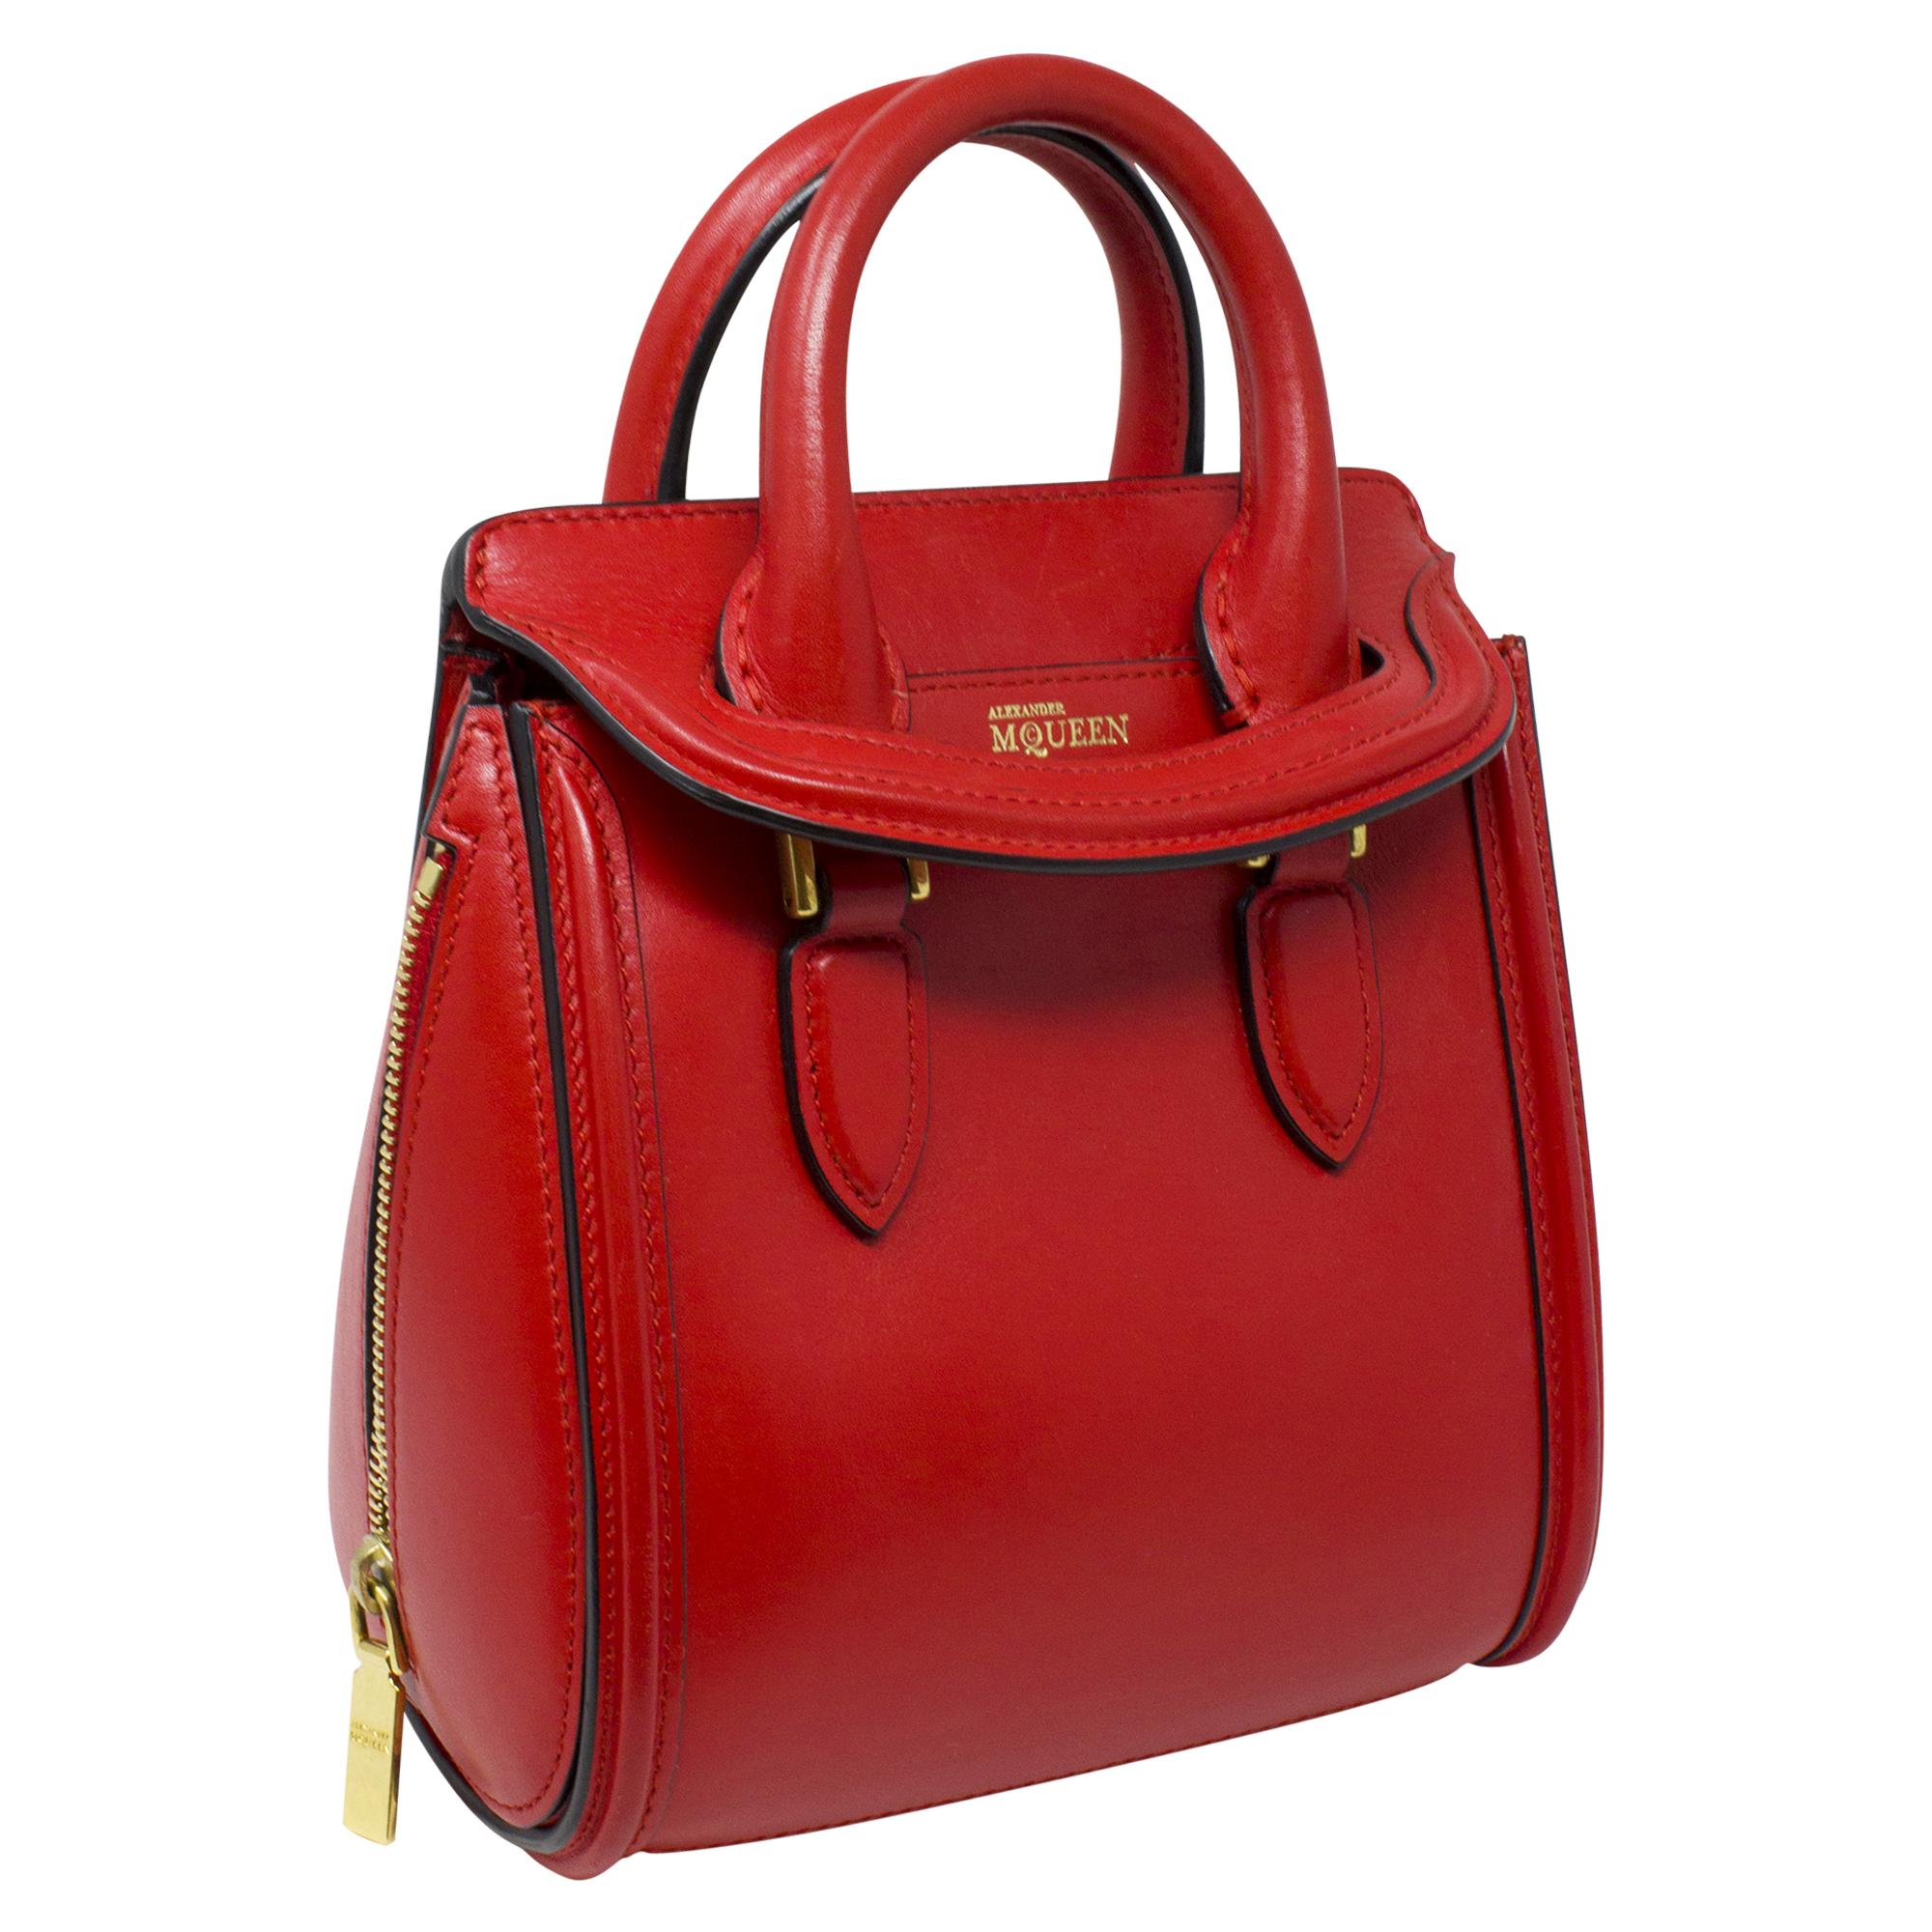 Introducing the Alexander McQueen Red Top Handle Bag, a bold and striking accessory for the fashion-forward individual. Crafted from vibrant red calfskin leather, this bag exudes confidence and style. With its sleek design and silver hardware